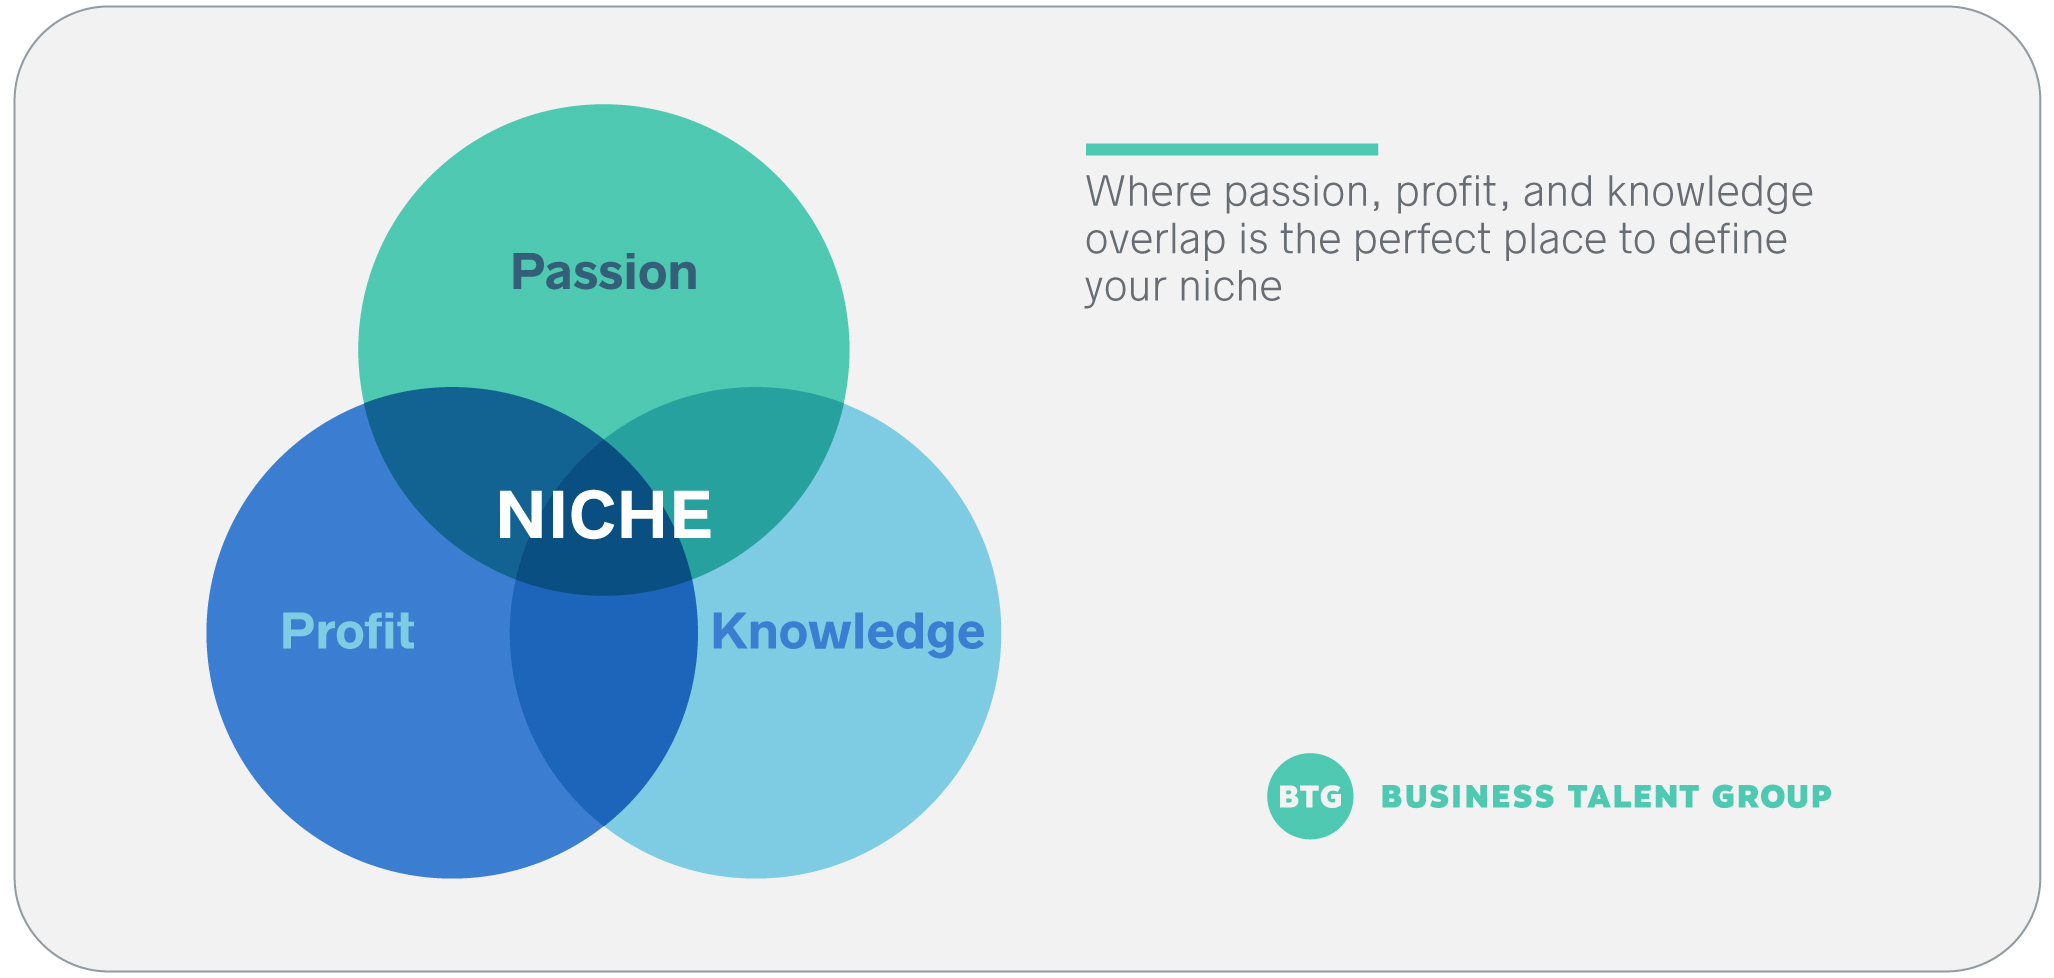 Venn diagram showing "Niche" at the intersection of "Passion, Profit, and Knowledge"